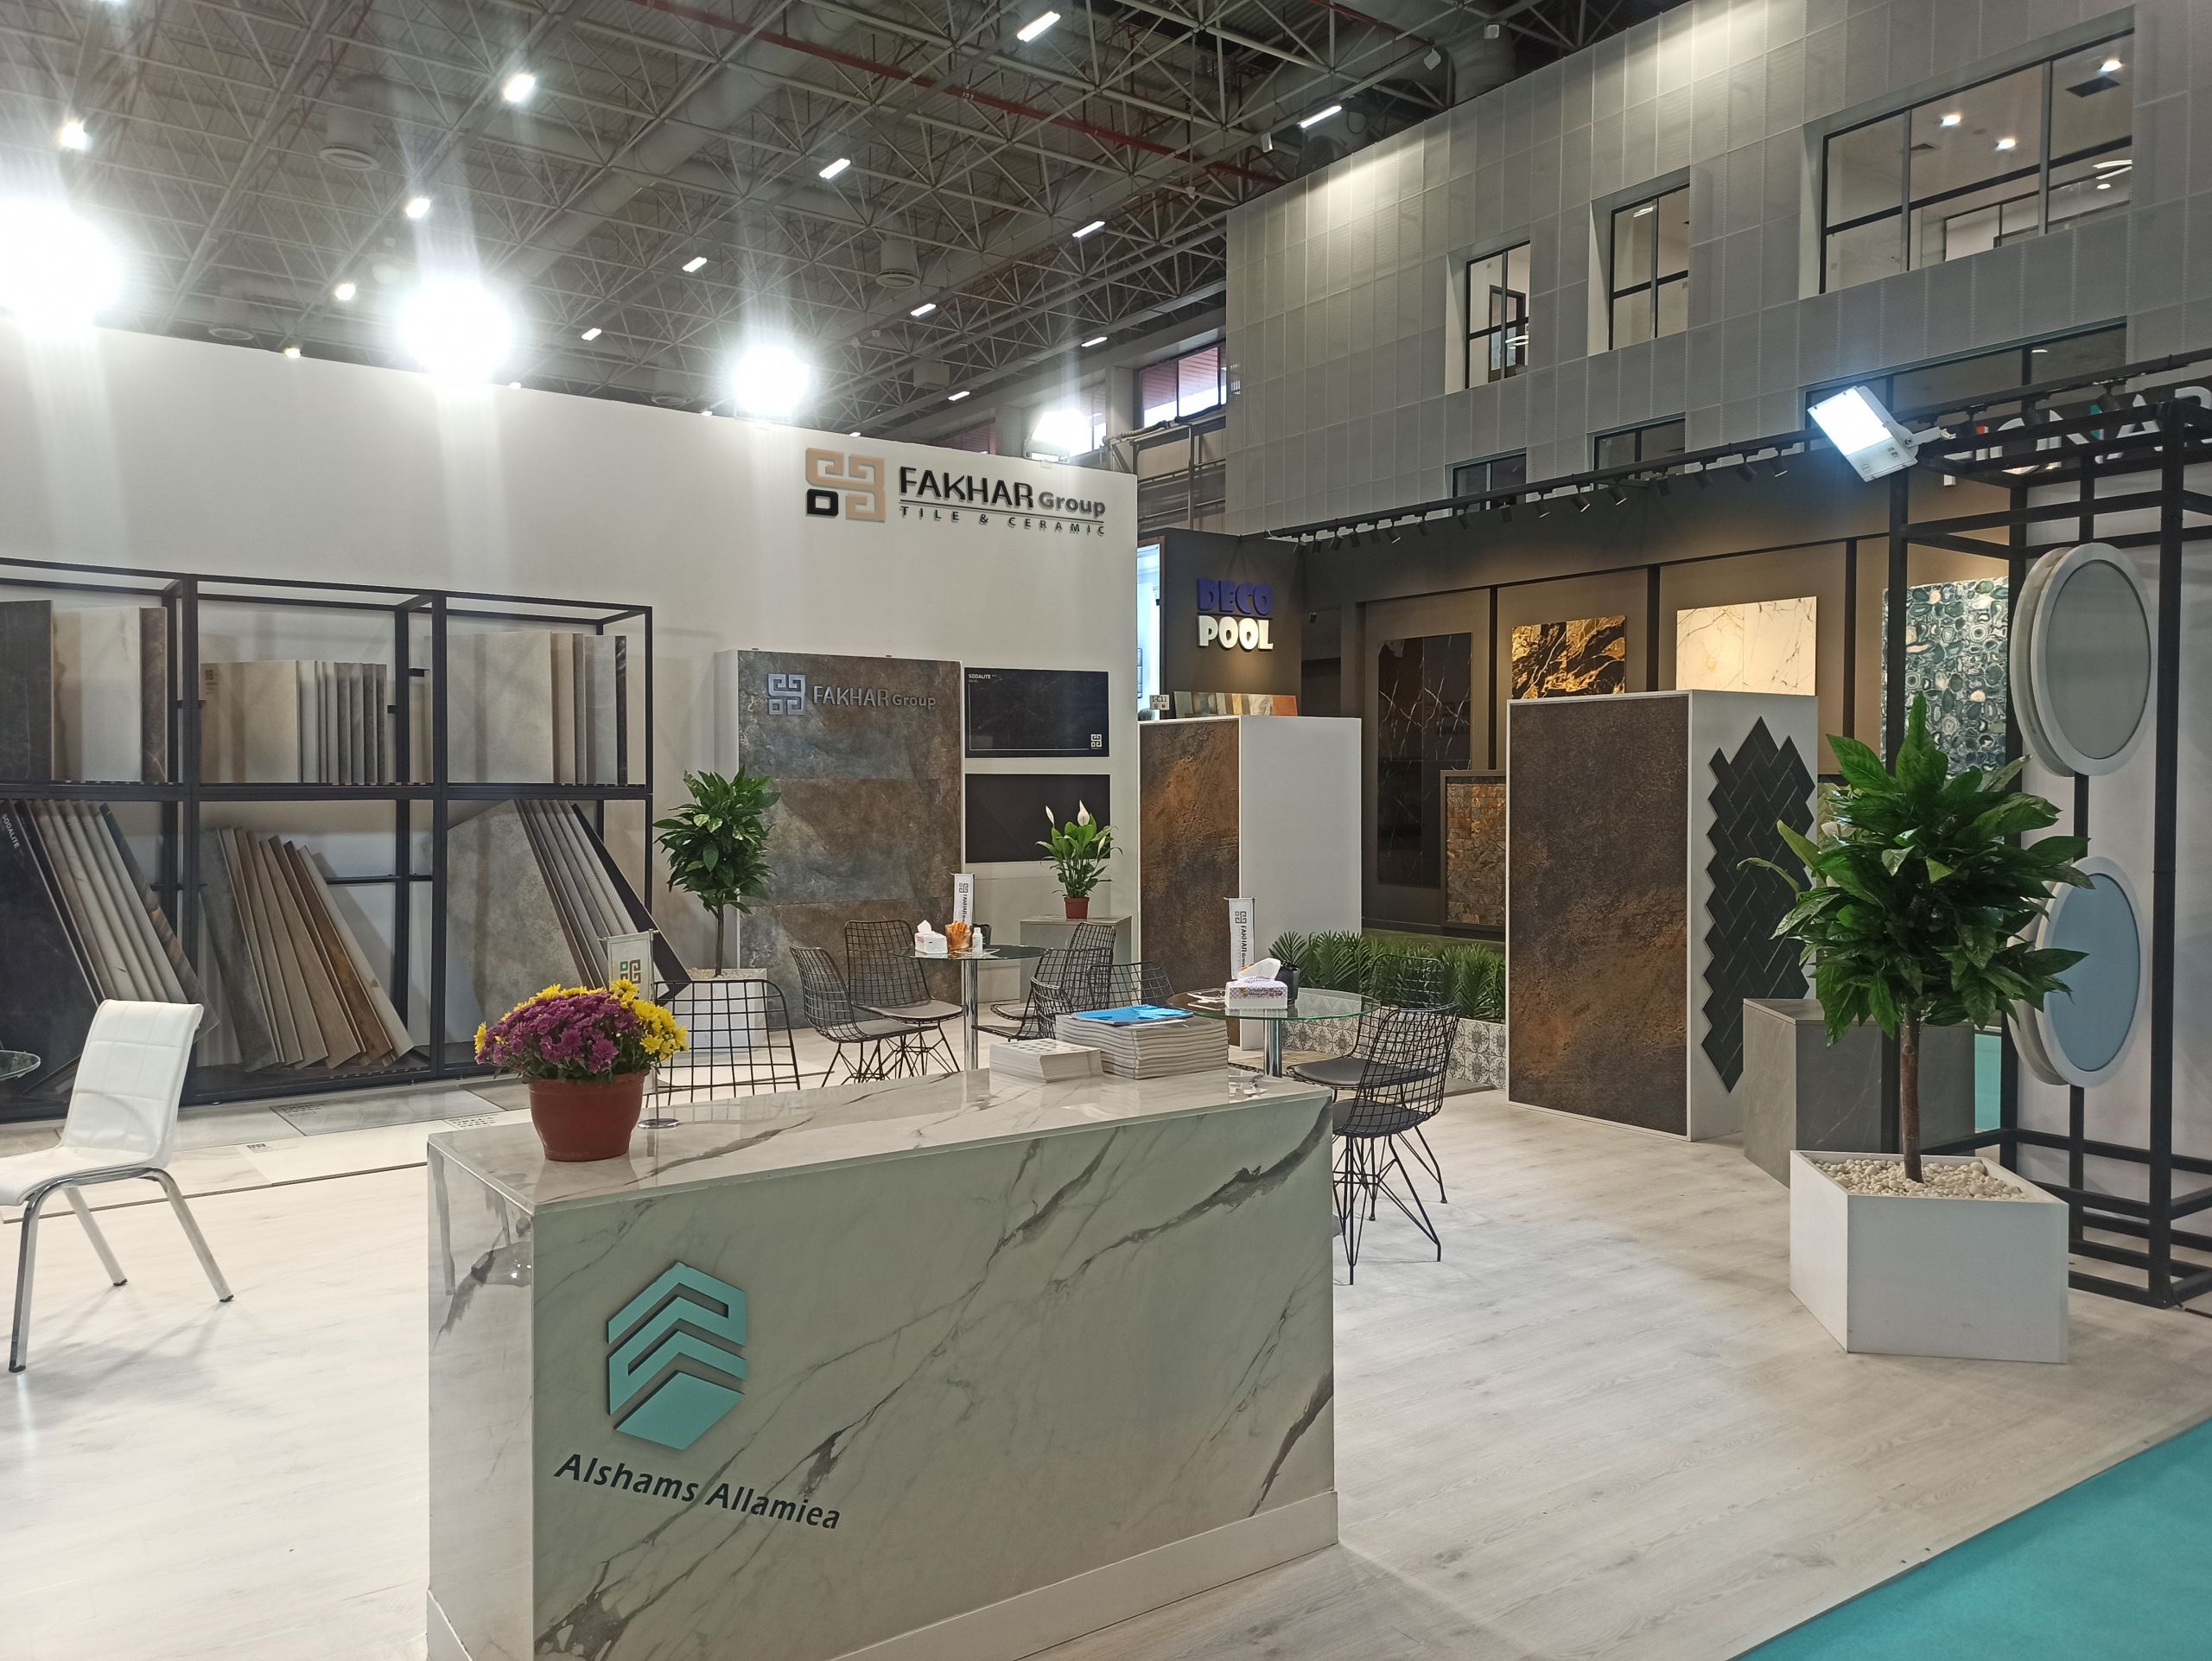 Unicera 2022 exhibition in Turkey, Fakhar group Tile production booth